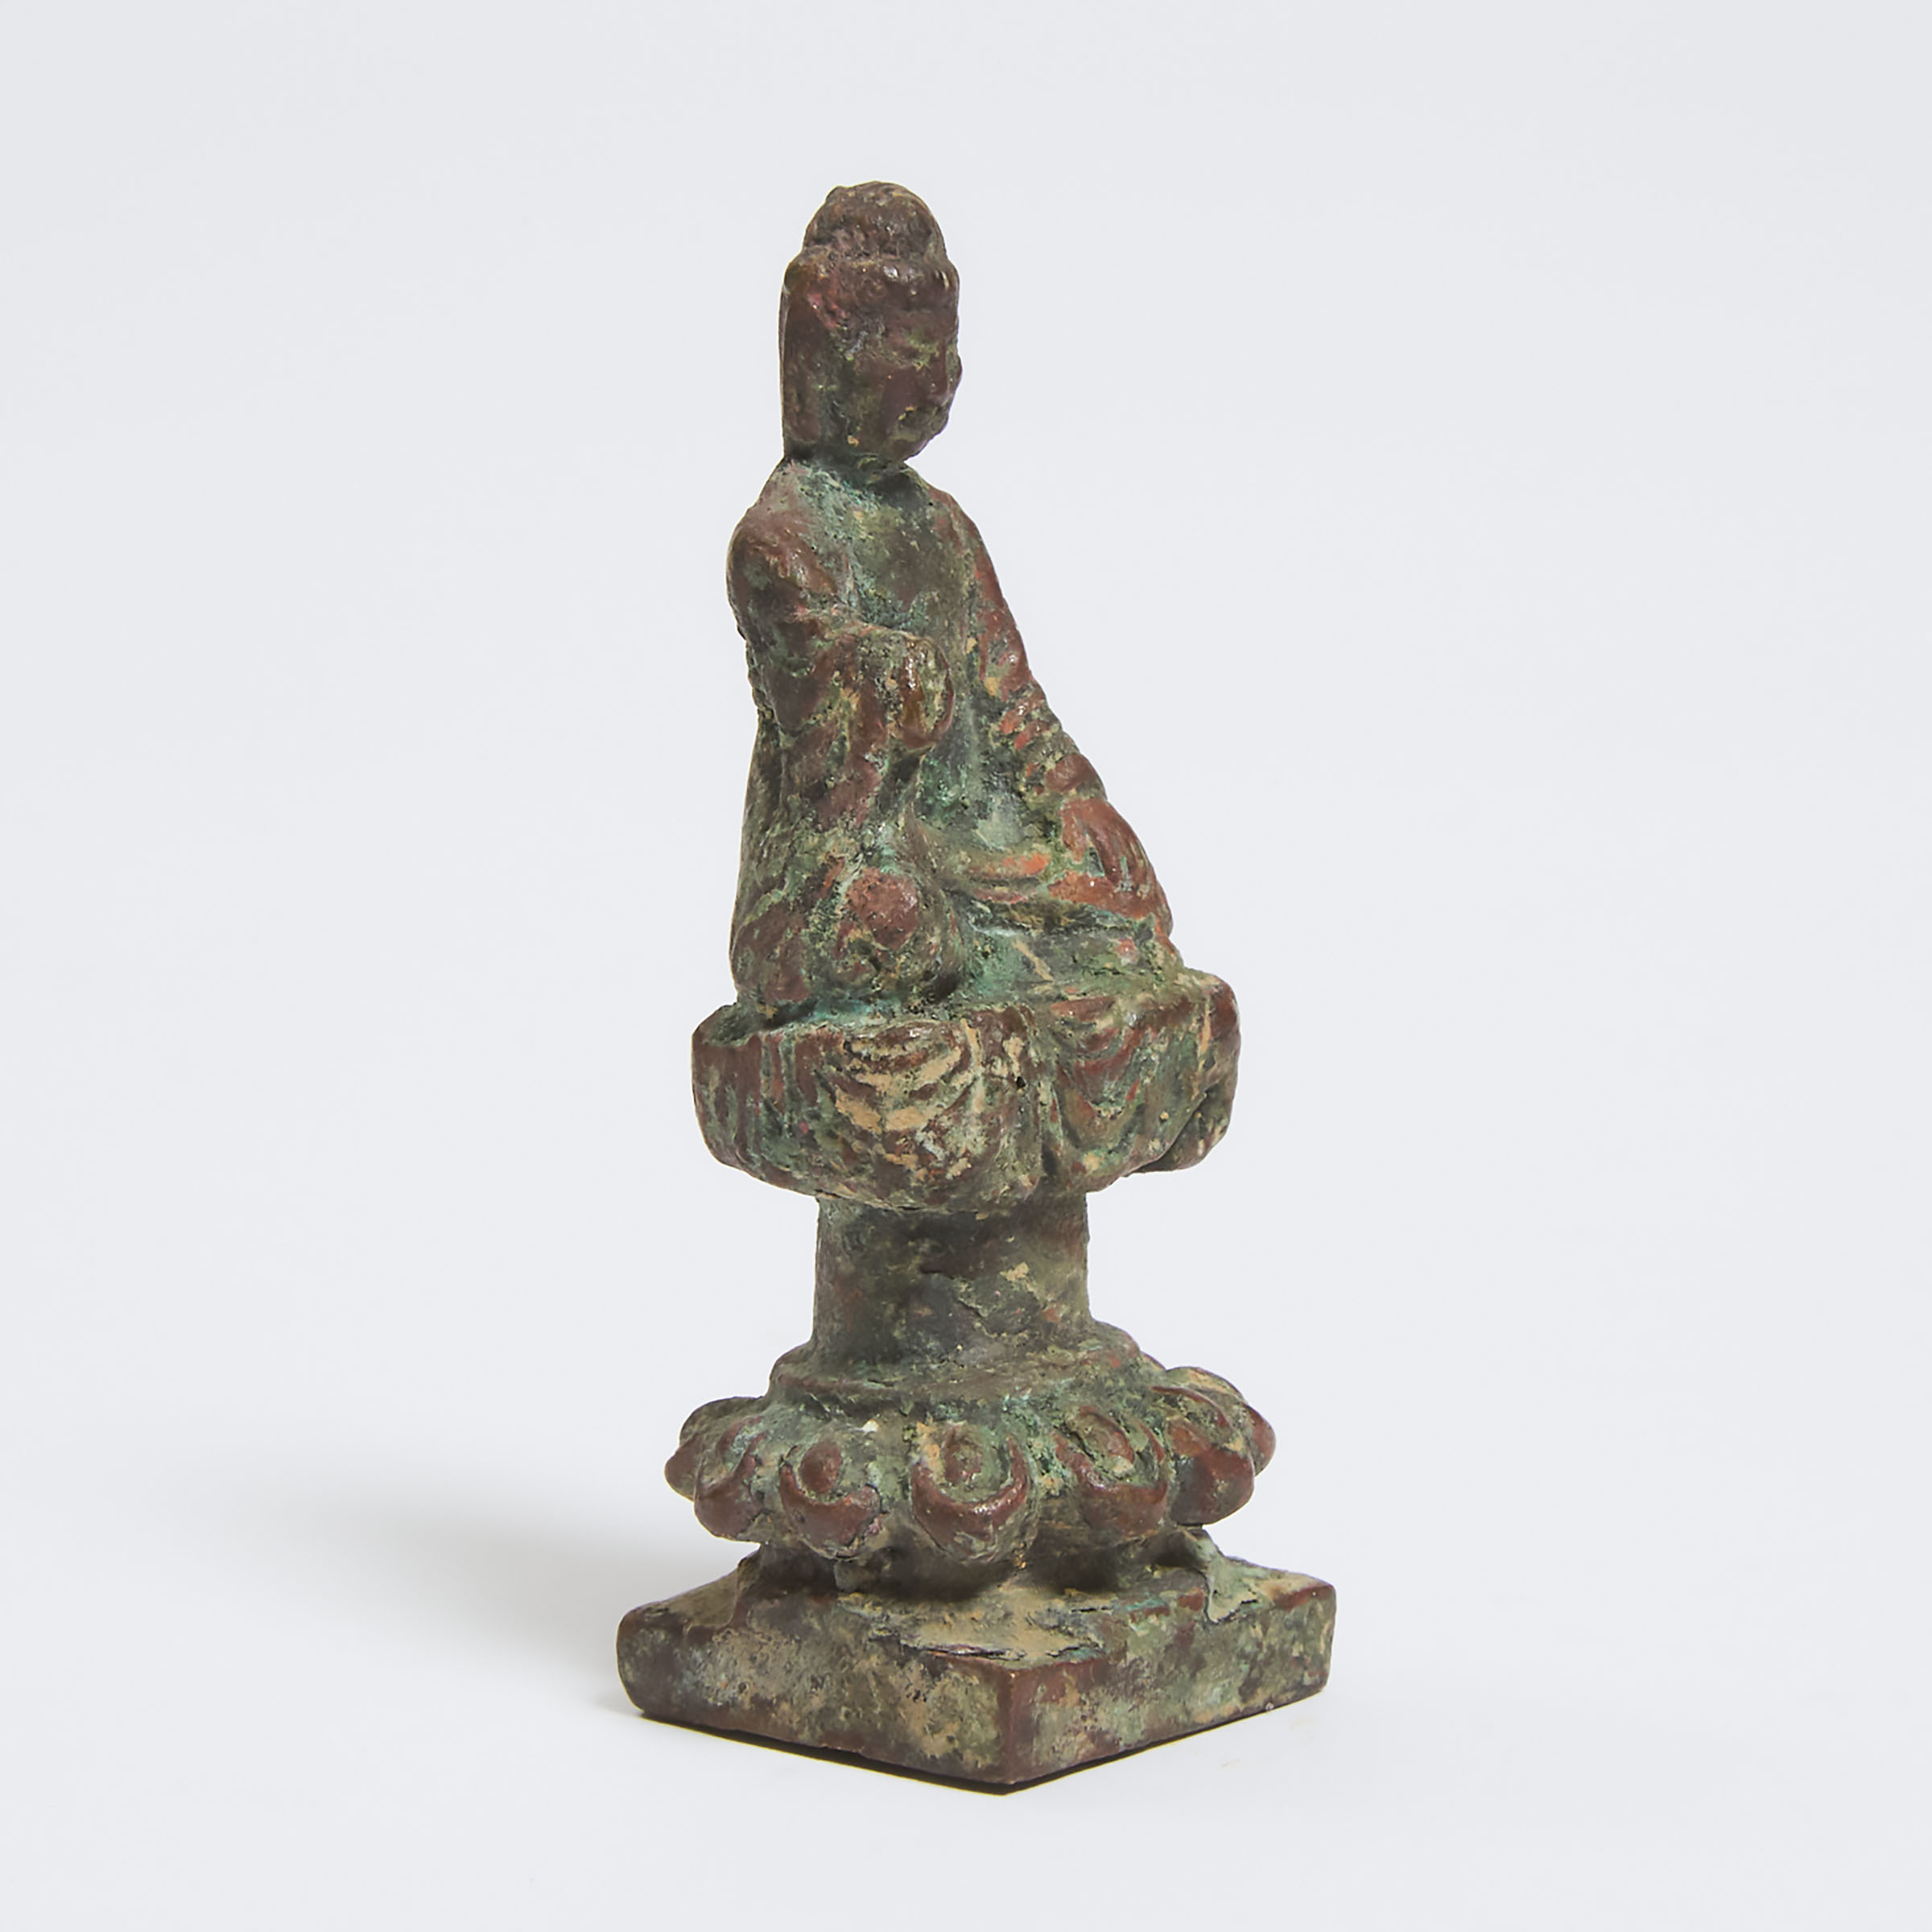 A Small Bronze Figure of a Seated Buddha, Tang Dynasty (AD 618-907)